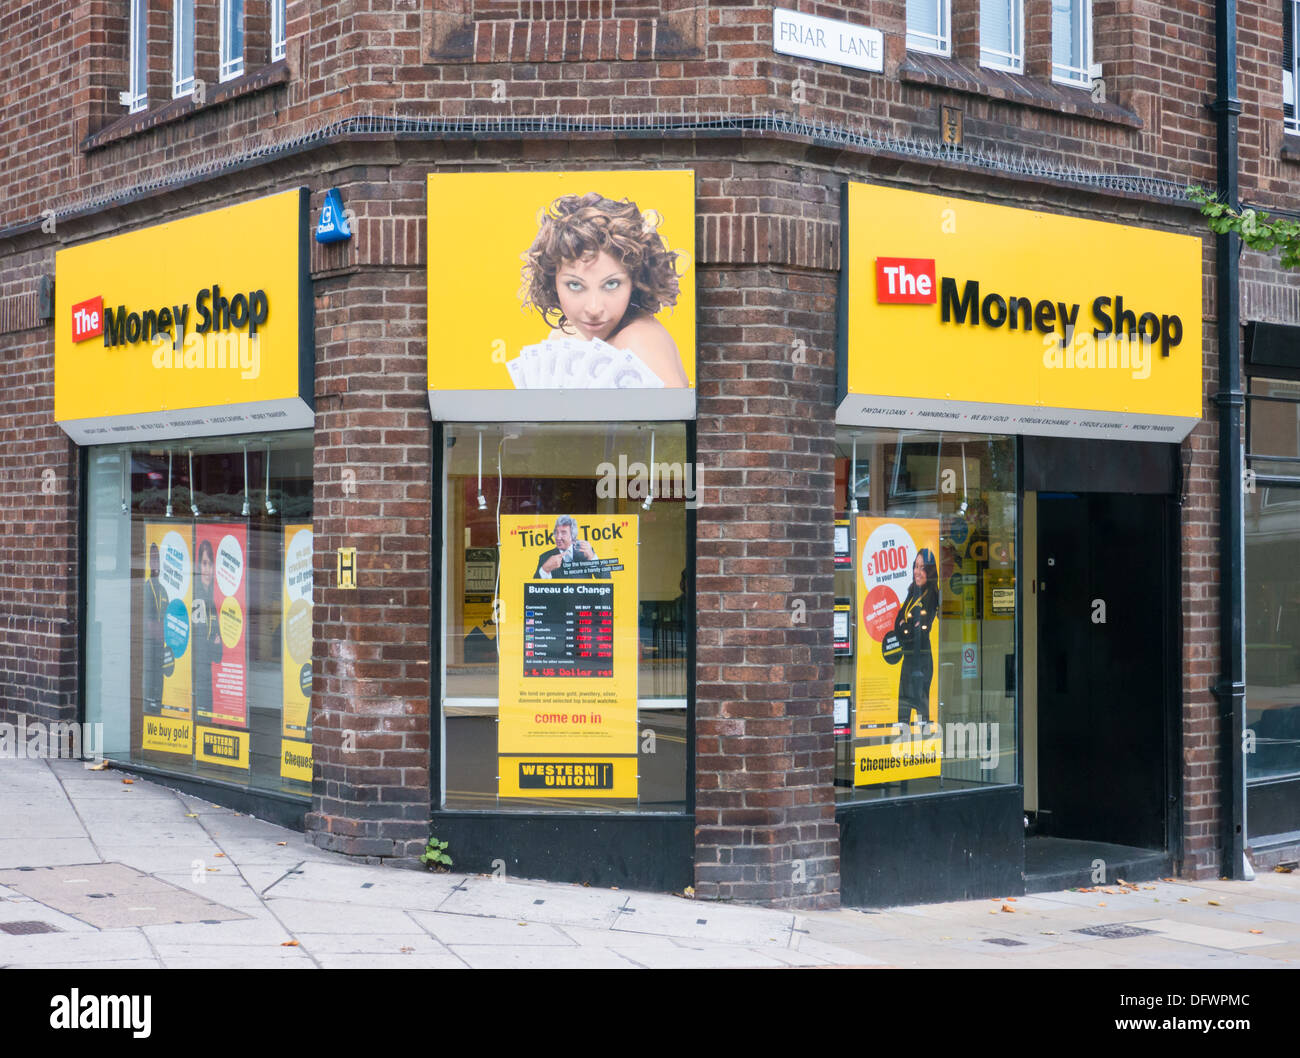 The Money Shop Payday Loan Company and Pawnbrokers owned by Dollar Financial Corp. Nottingham, United Kingdom, UK Stock Photo